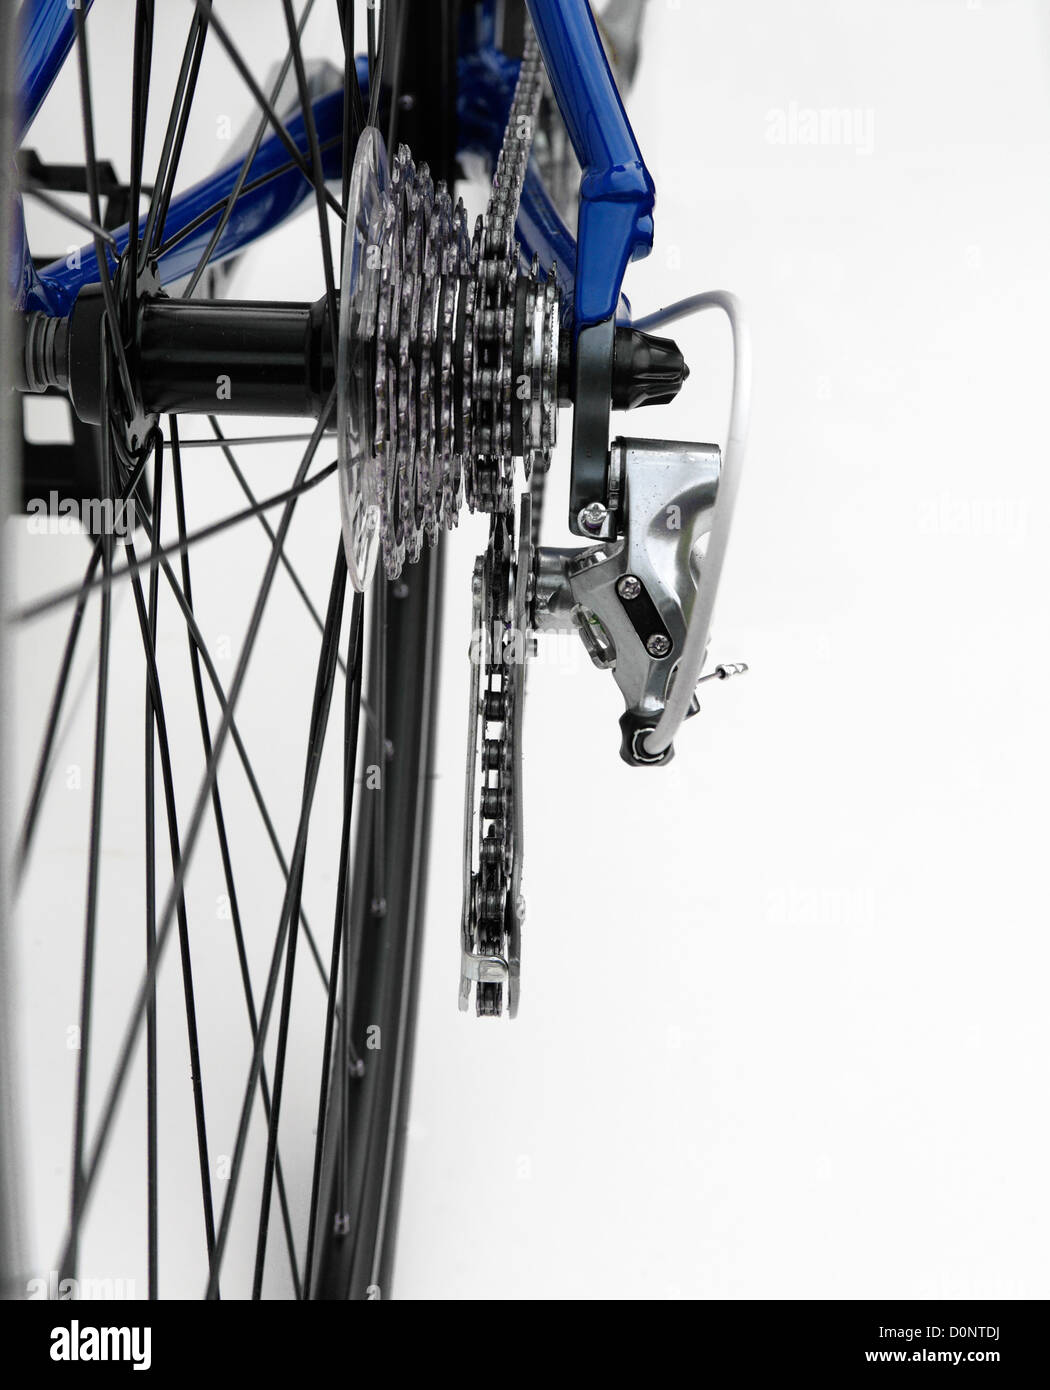 Road  racing bike bicycle rear derailleur gears sprockets chain transmission rear view from wheel hub spokes Stock Photo